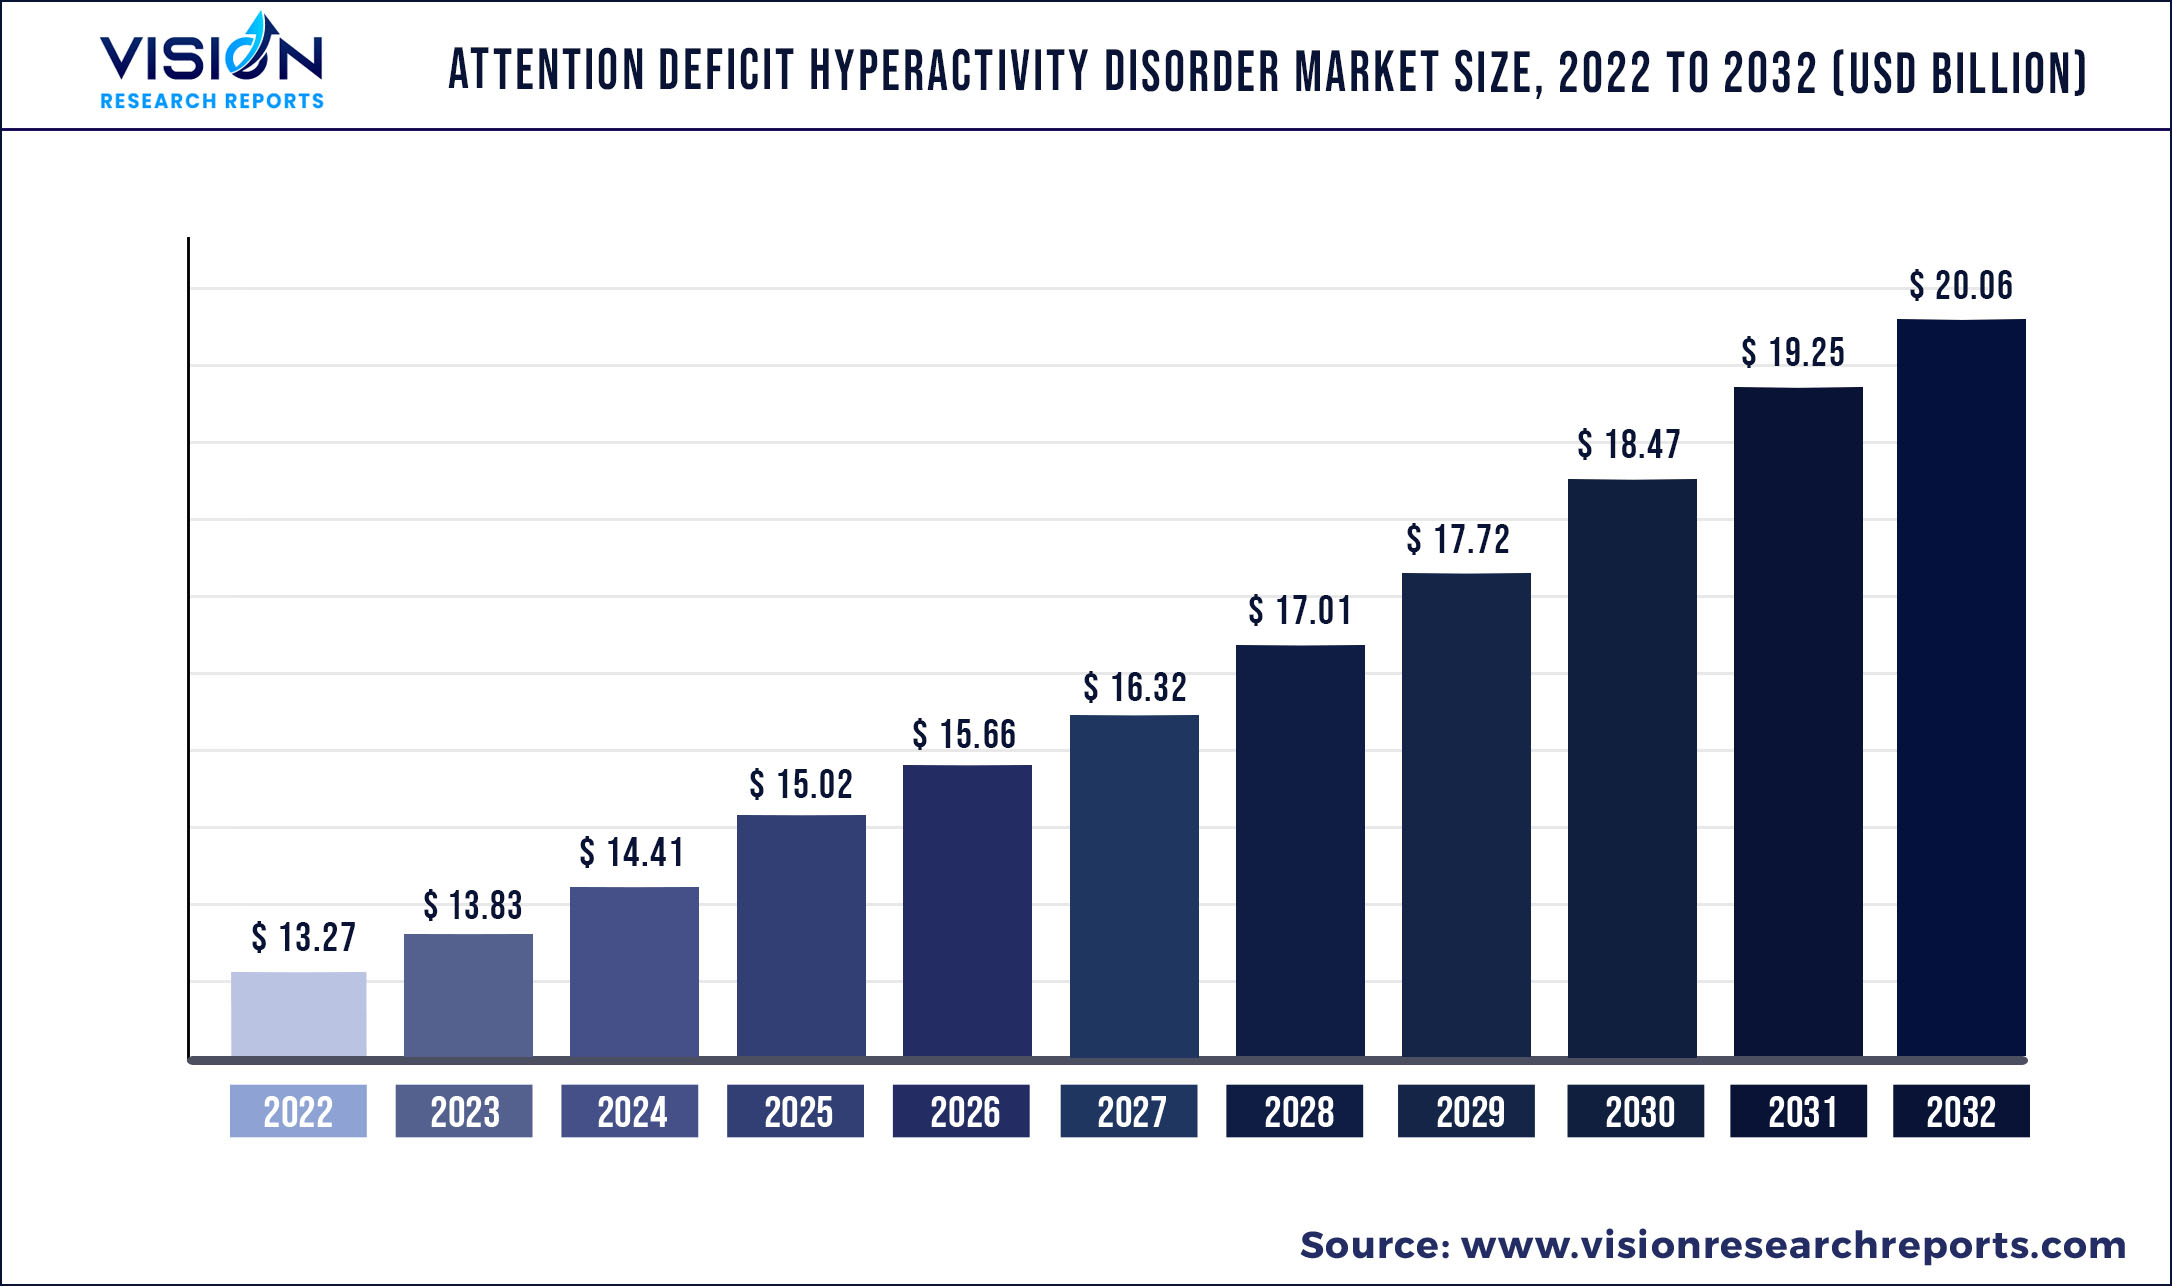 Attention Deficit Hyperactivity Disorder Market Size 2022 to 2032